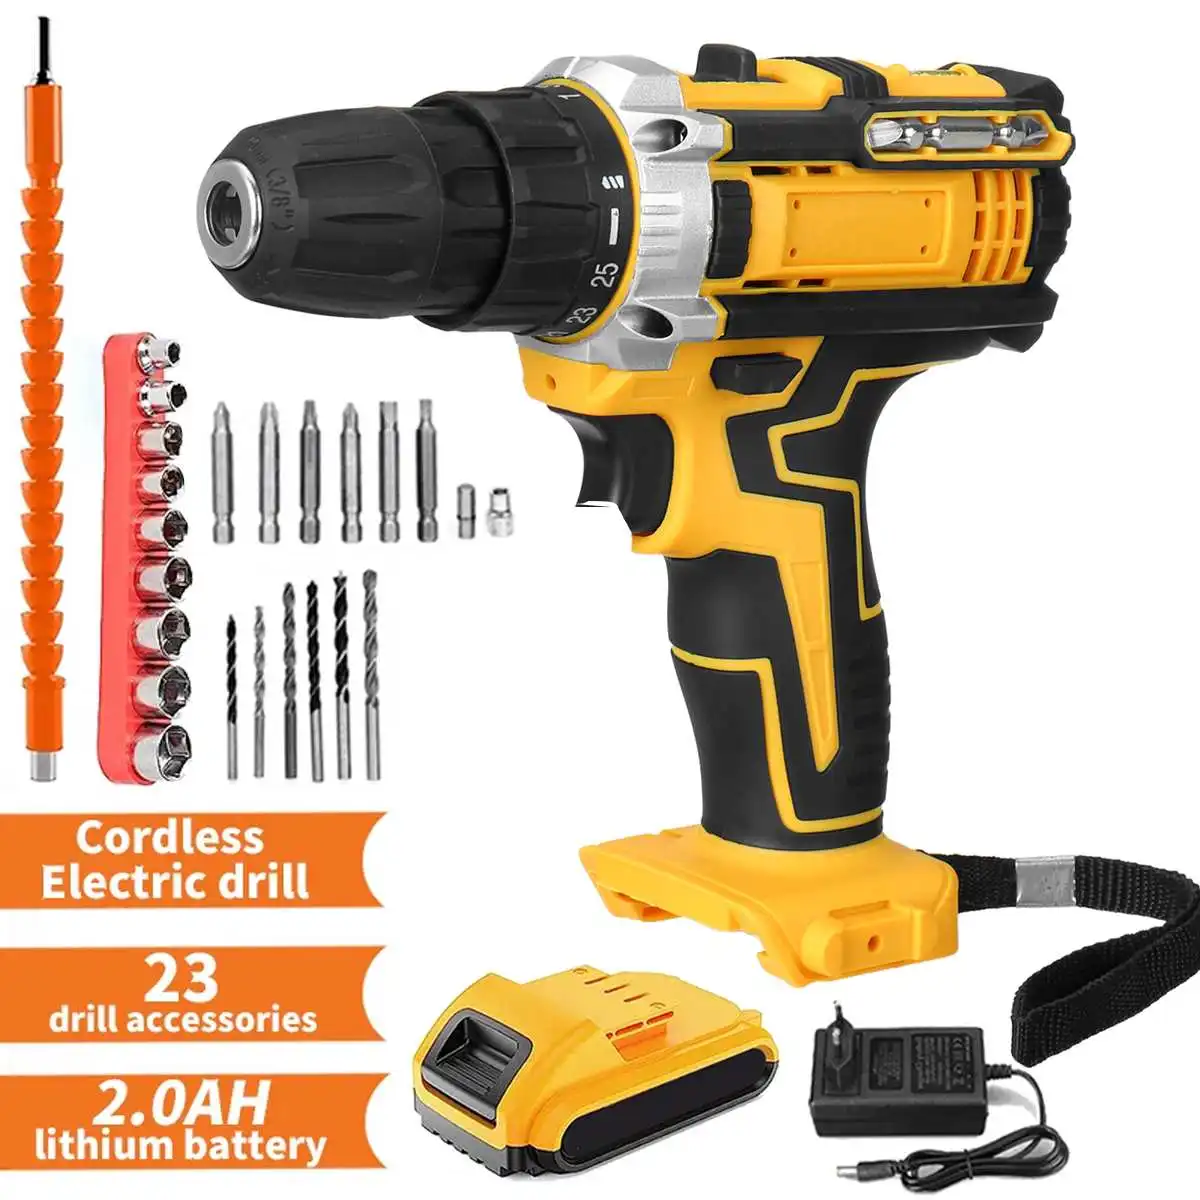 

18V 25+3 Torque 45Nm Cordless Electric Drill 3/8" Chuck Screwdriver 23pcs Drills 2 Variable Speed Drilling Tool with One Battery